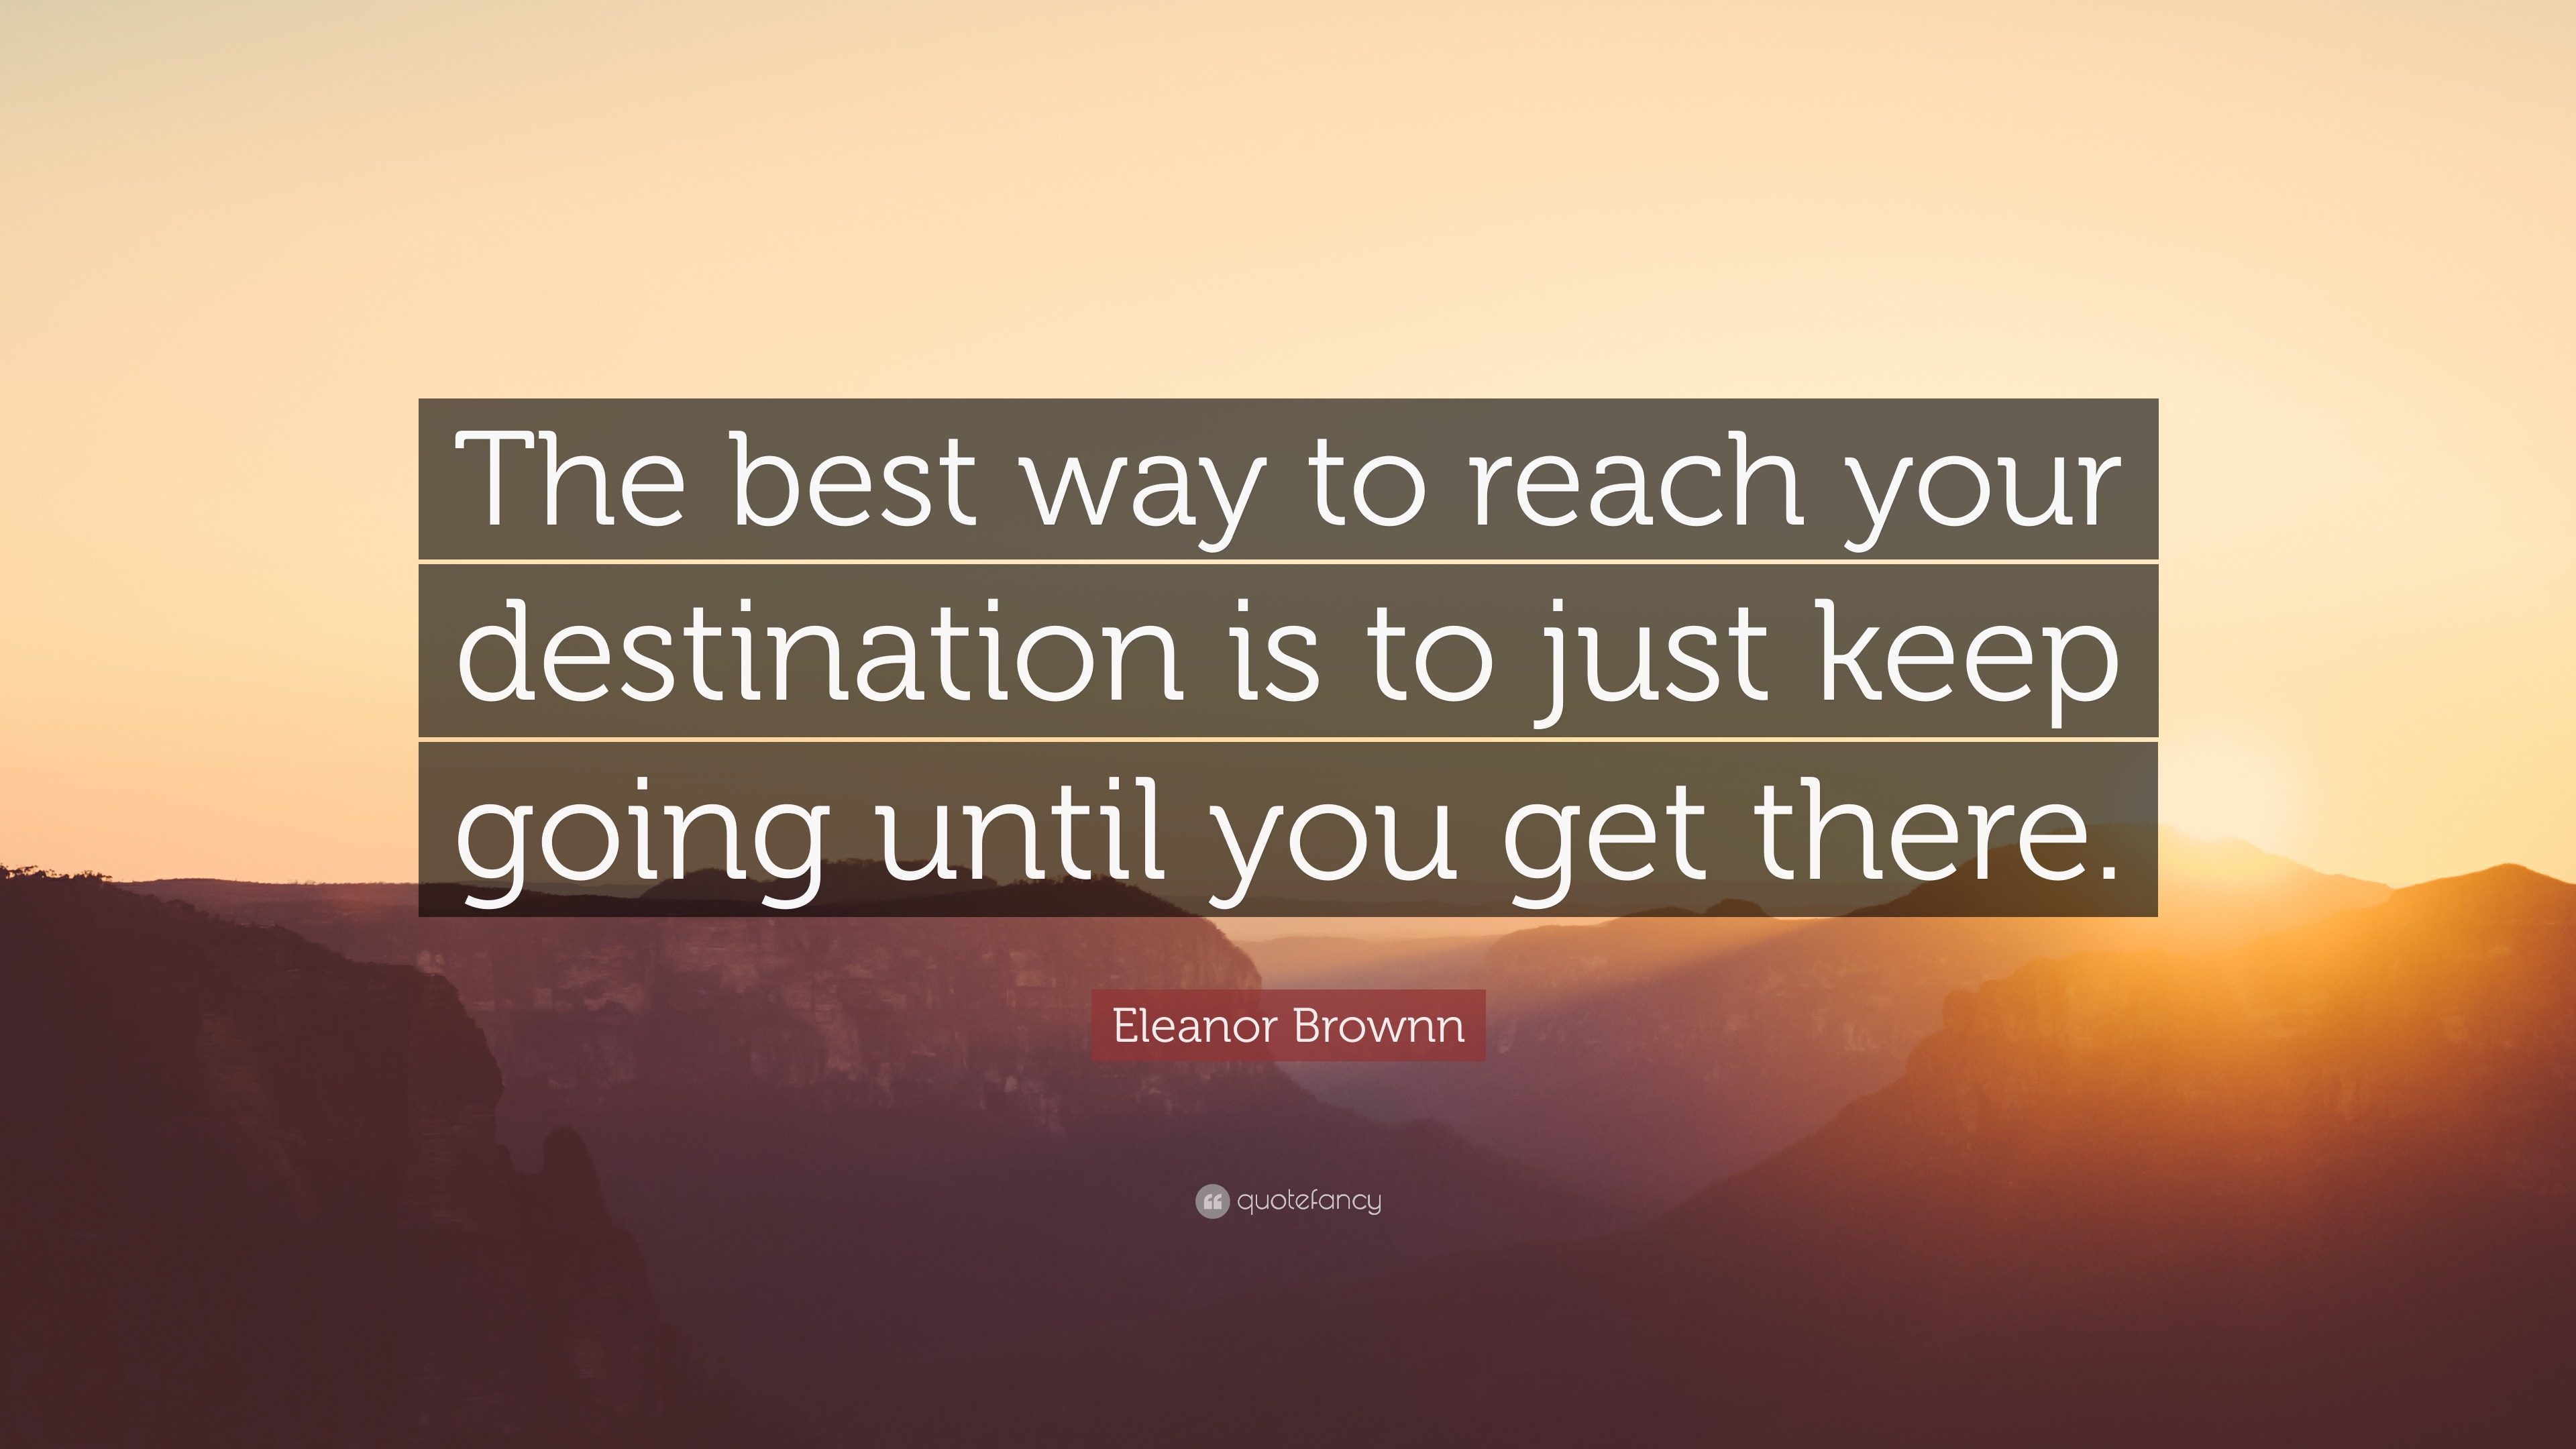 Eleanor Brownn Quote “The best way to reach your destination is to